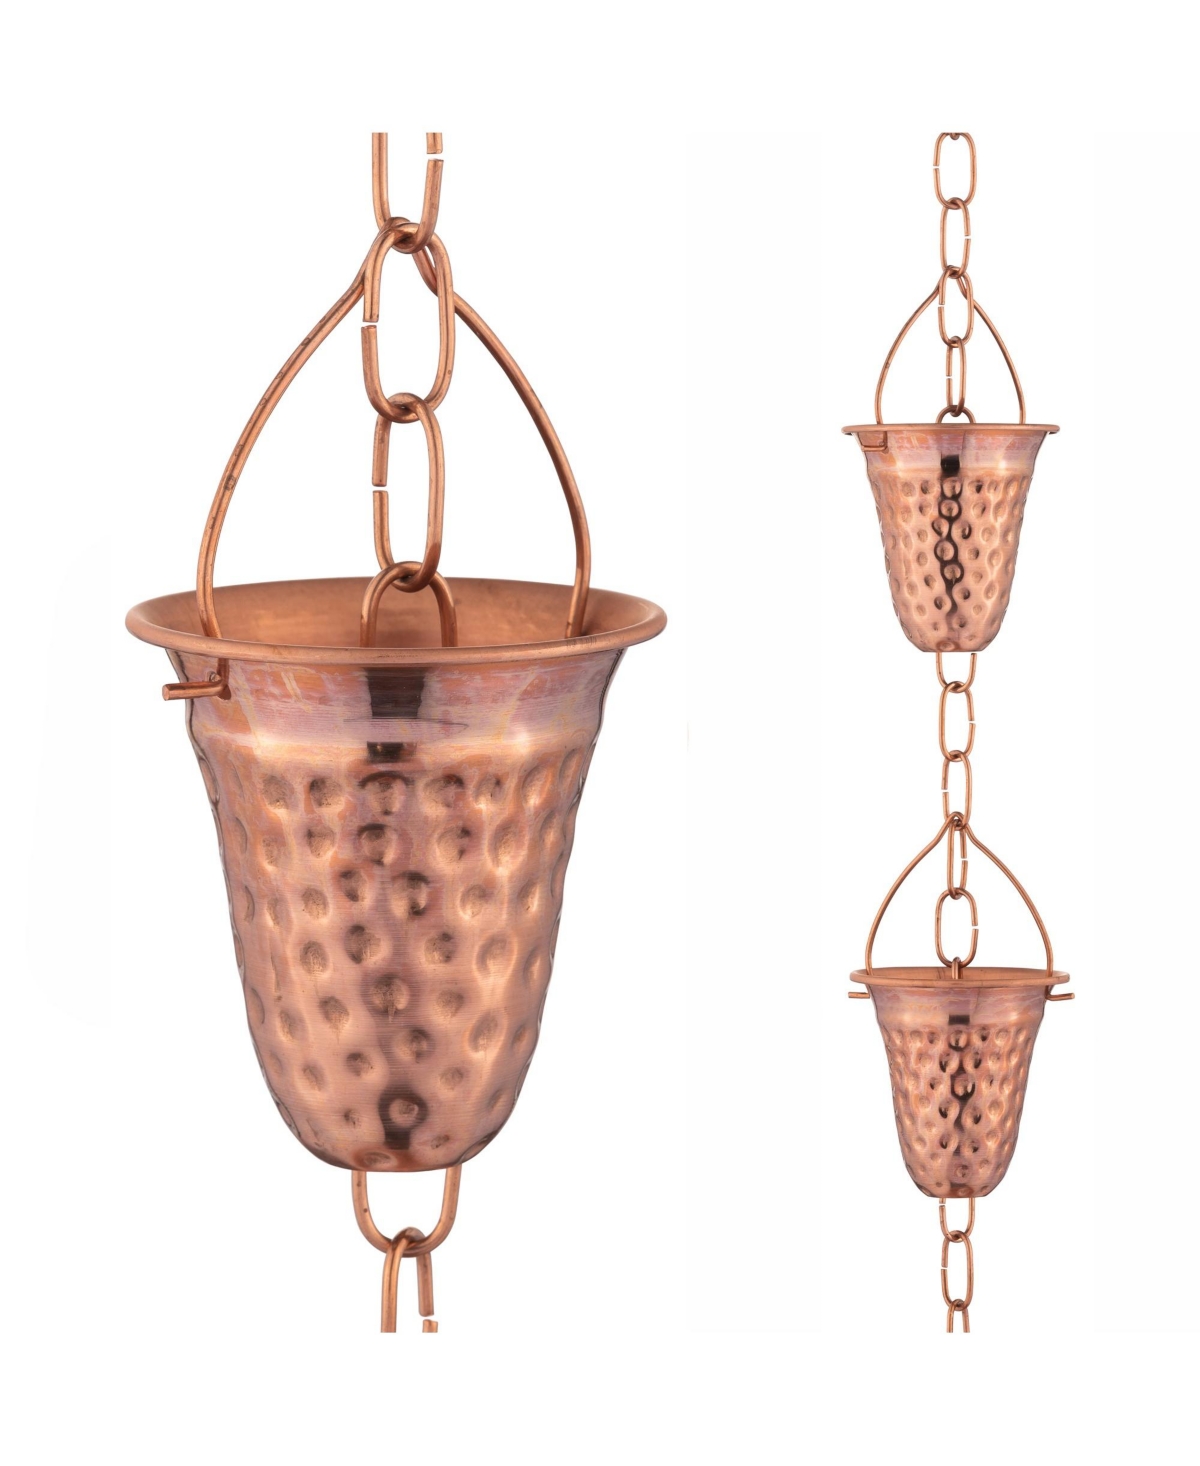 Copper Rain Chain with Hammered Bell Style Cups for Gutter Downspout Replacement - Copper